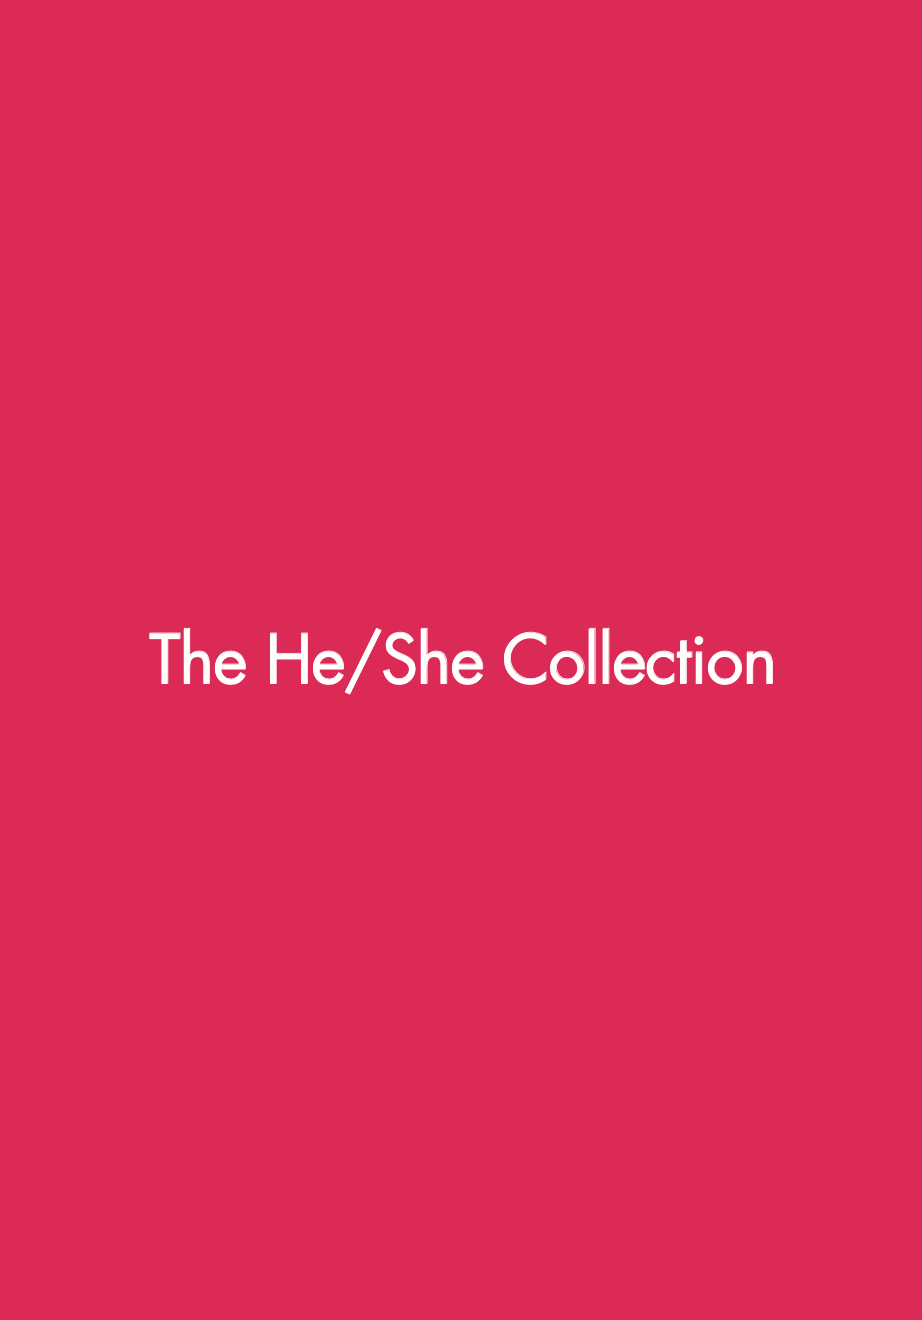 A title page from the book "Lovelier - The Goddess and The Dragon". Bright fuchsia background with white text that reads: "The He/She Collection."